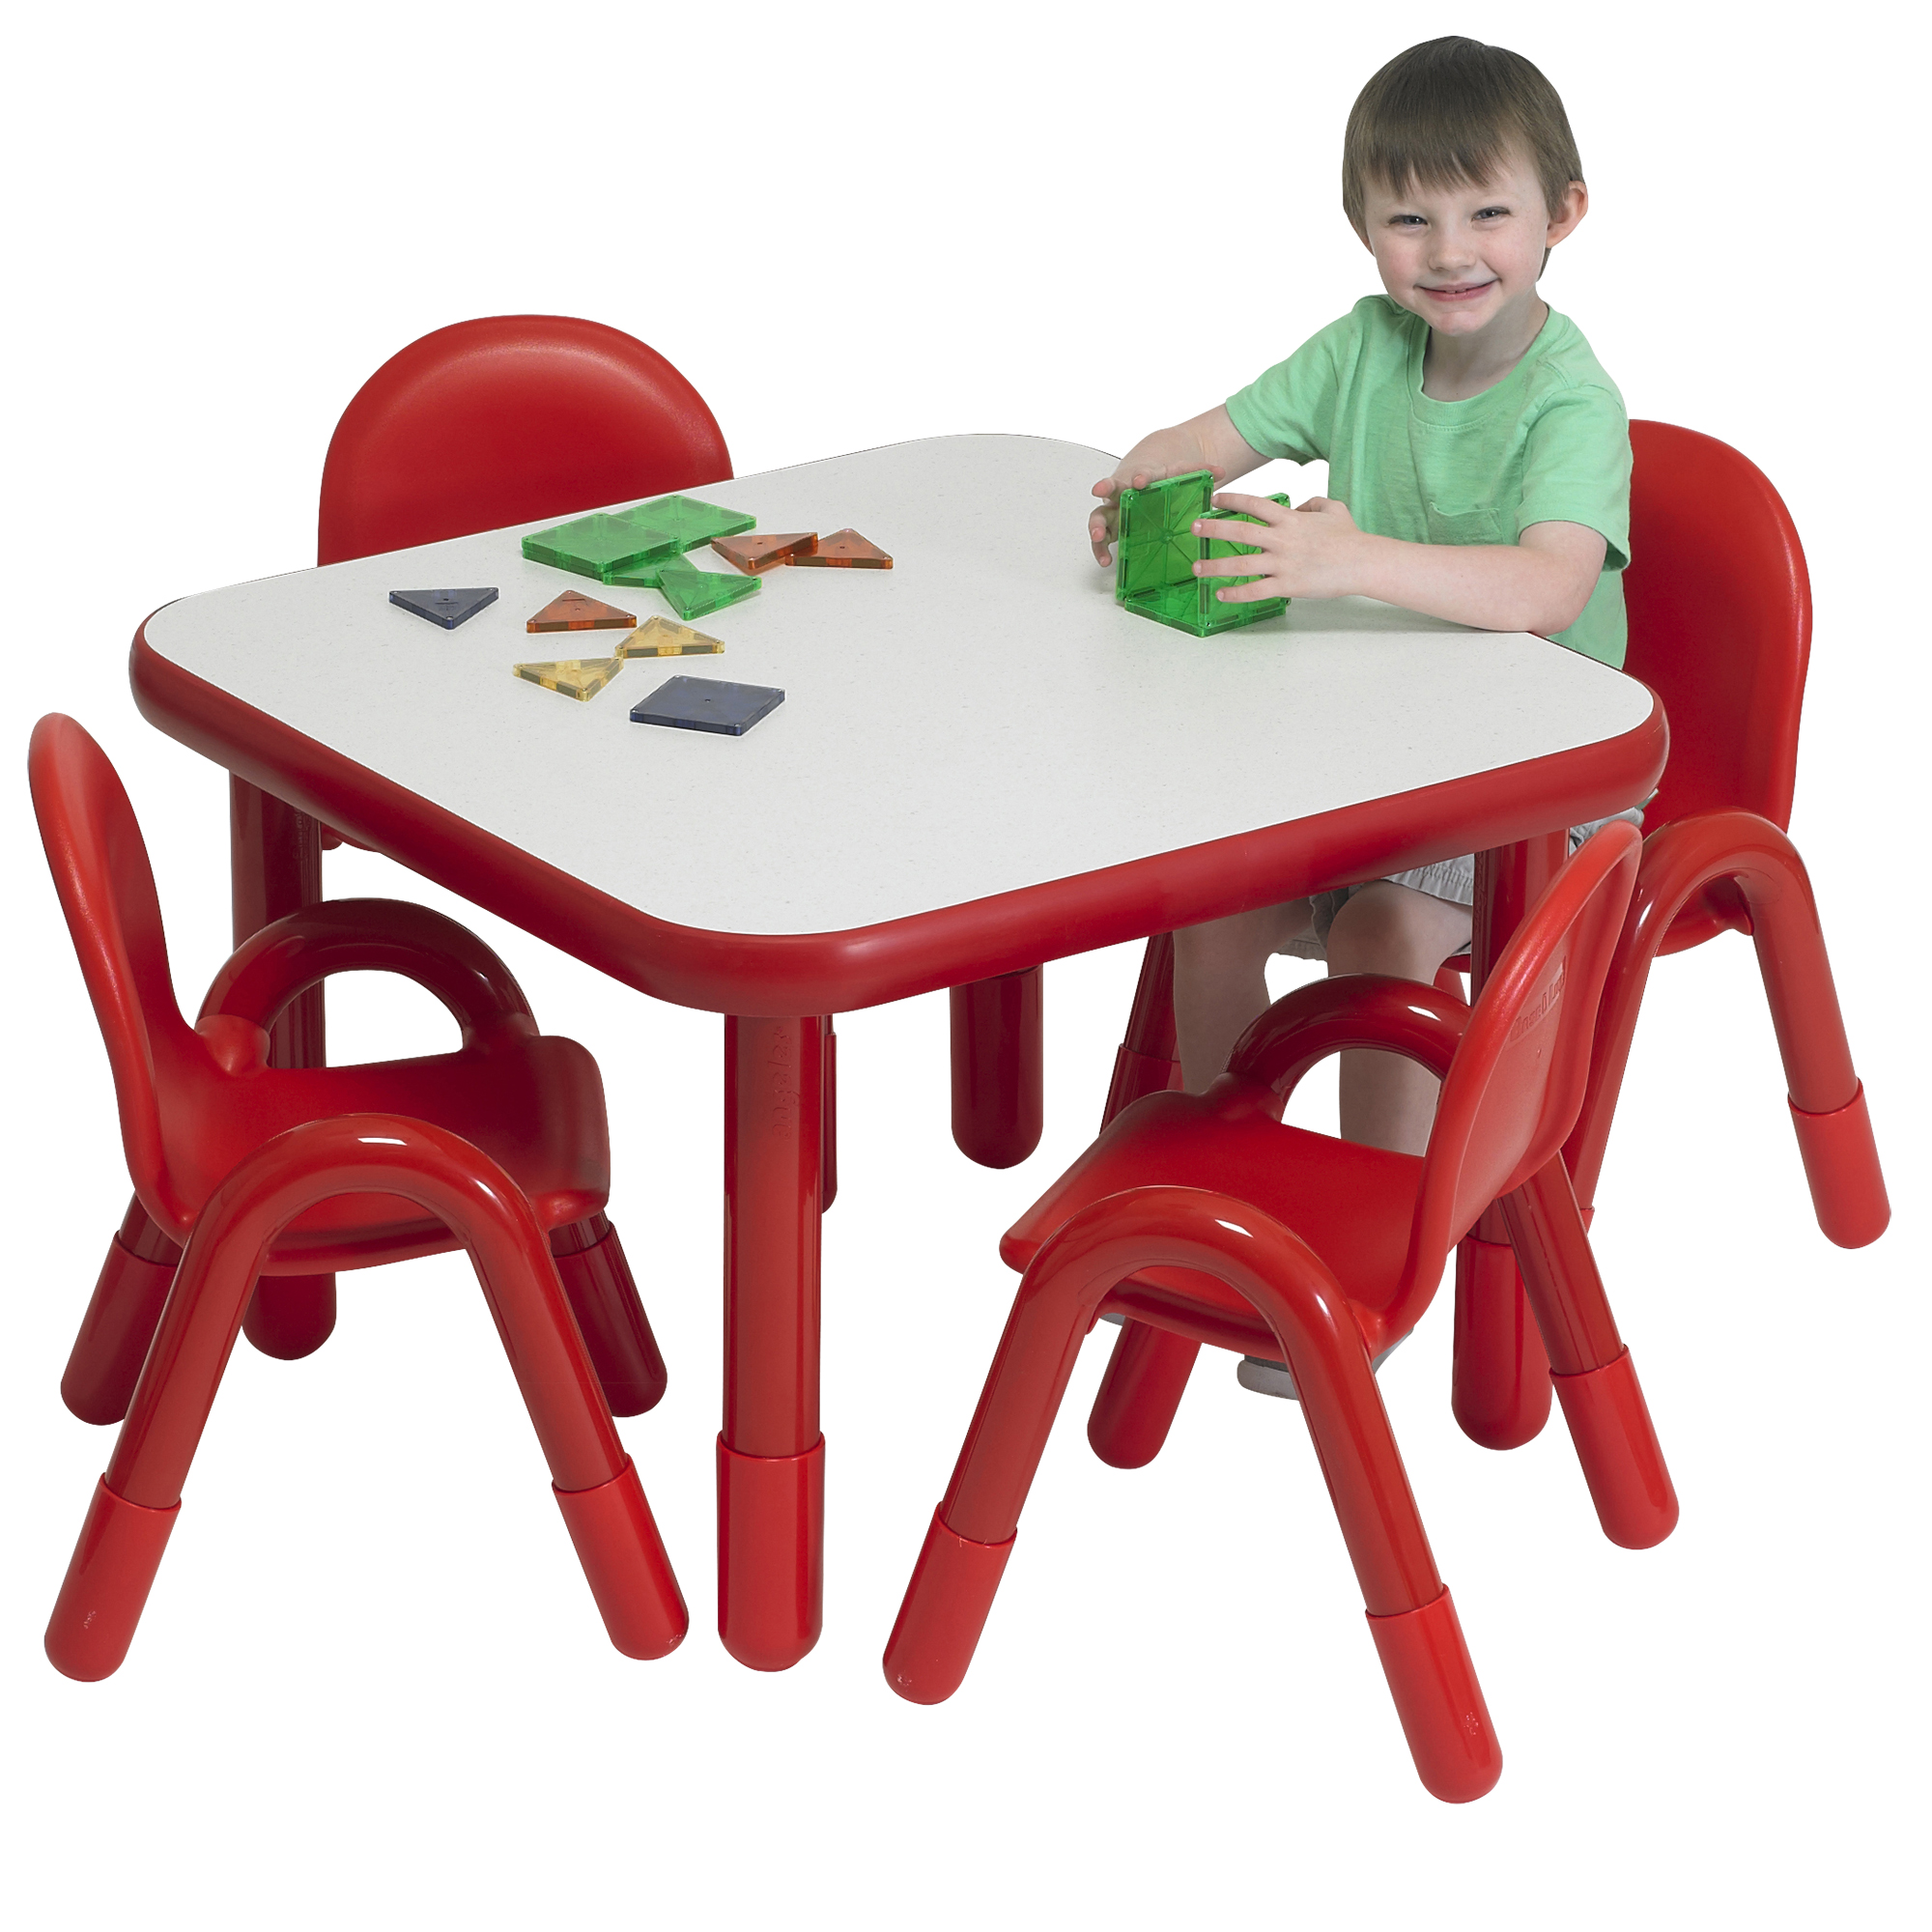 BaseLine® Preschool 76 cm  Square Table & Chair Set - Solid Candy Apple Red